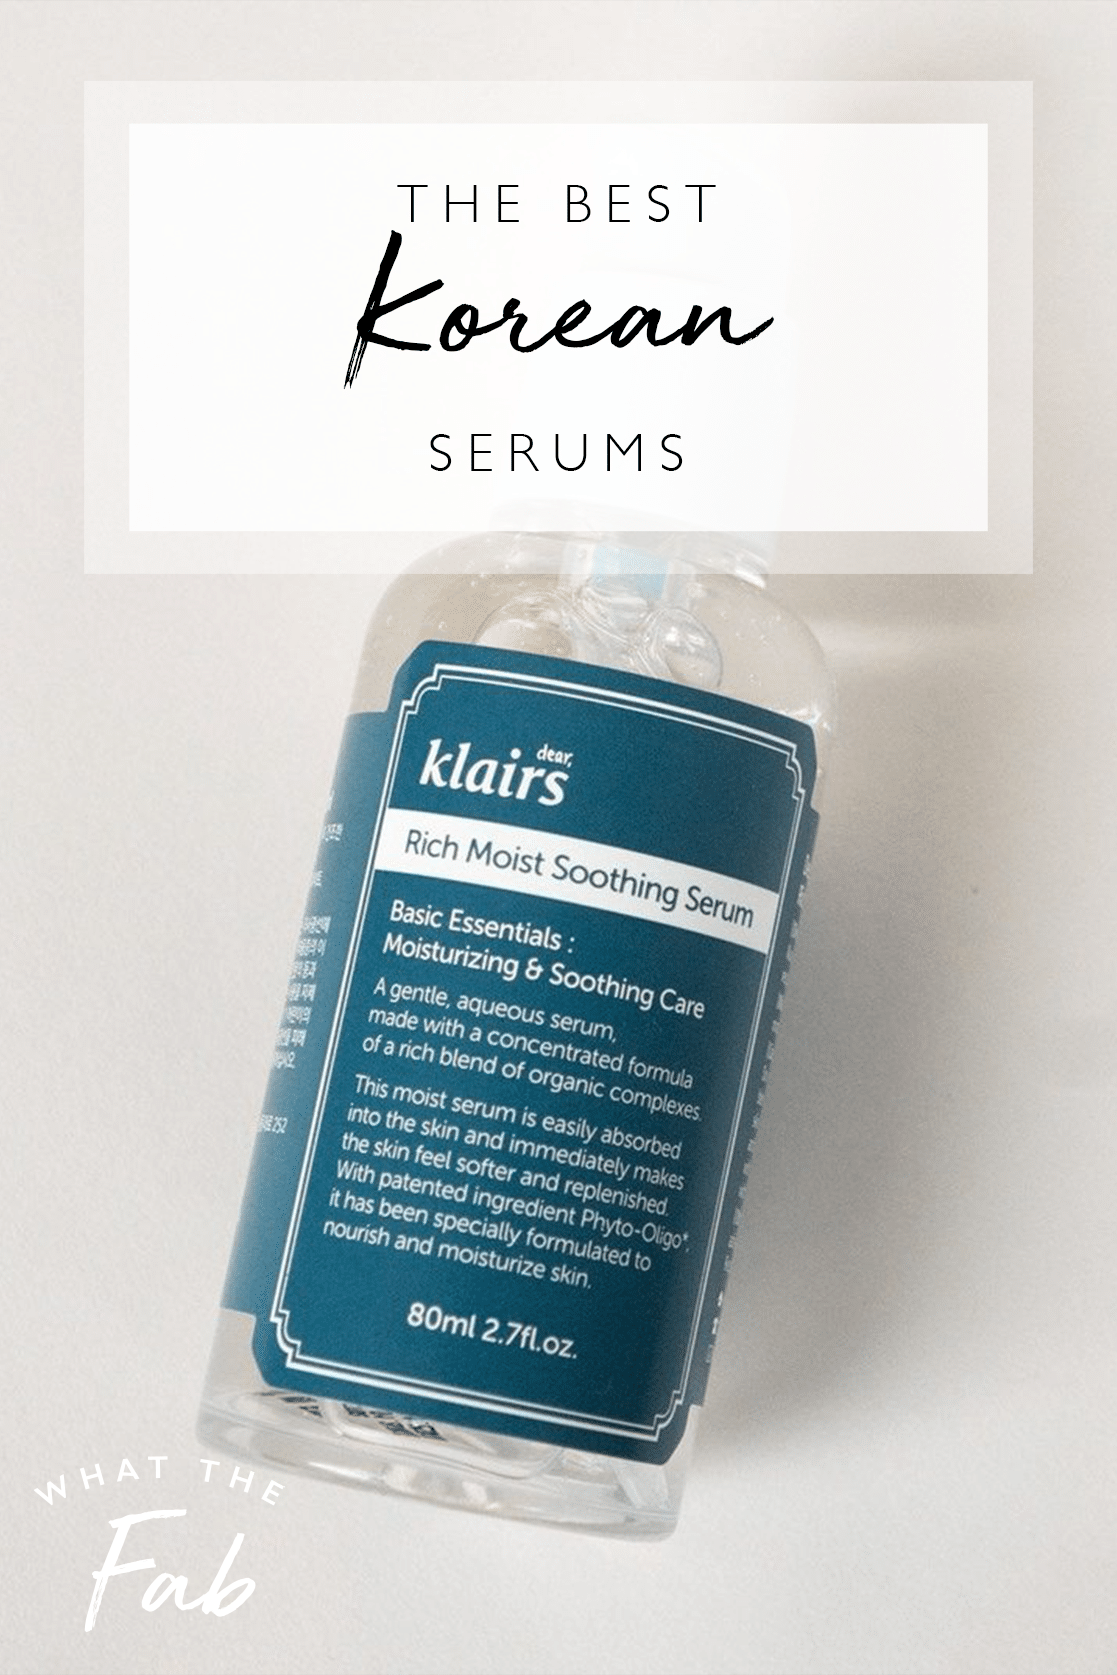 Best Korean serums, by beauty blogger What The Fab